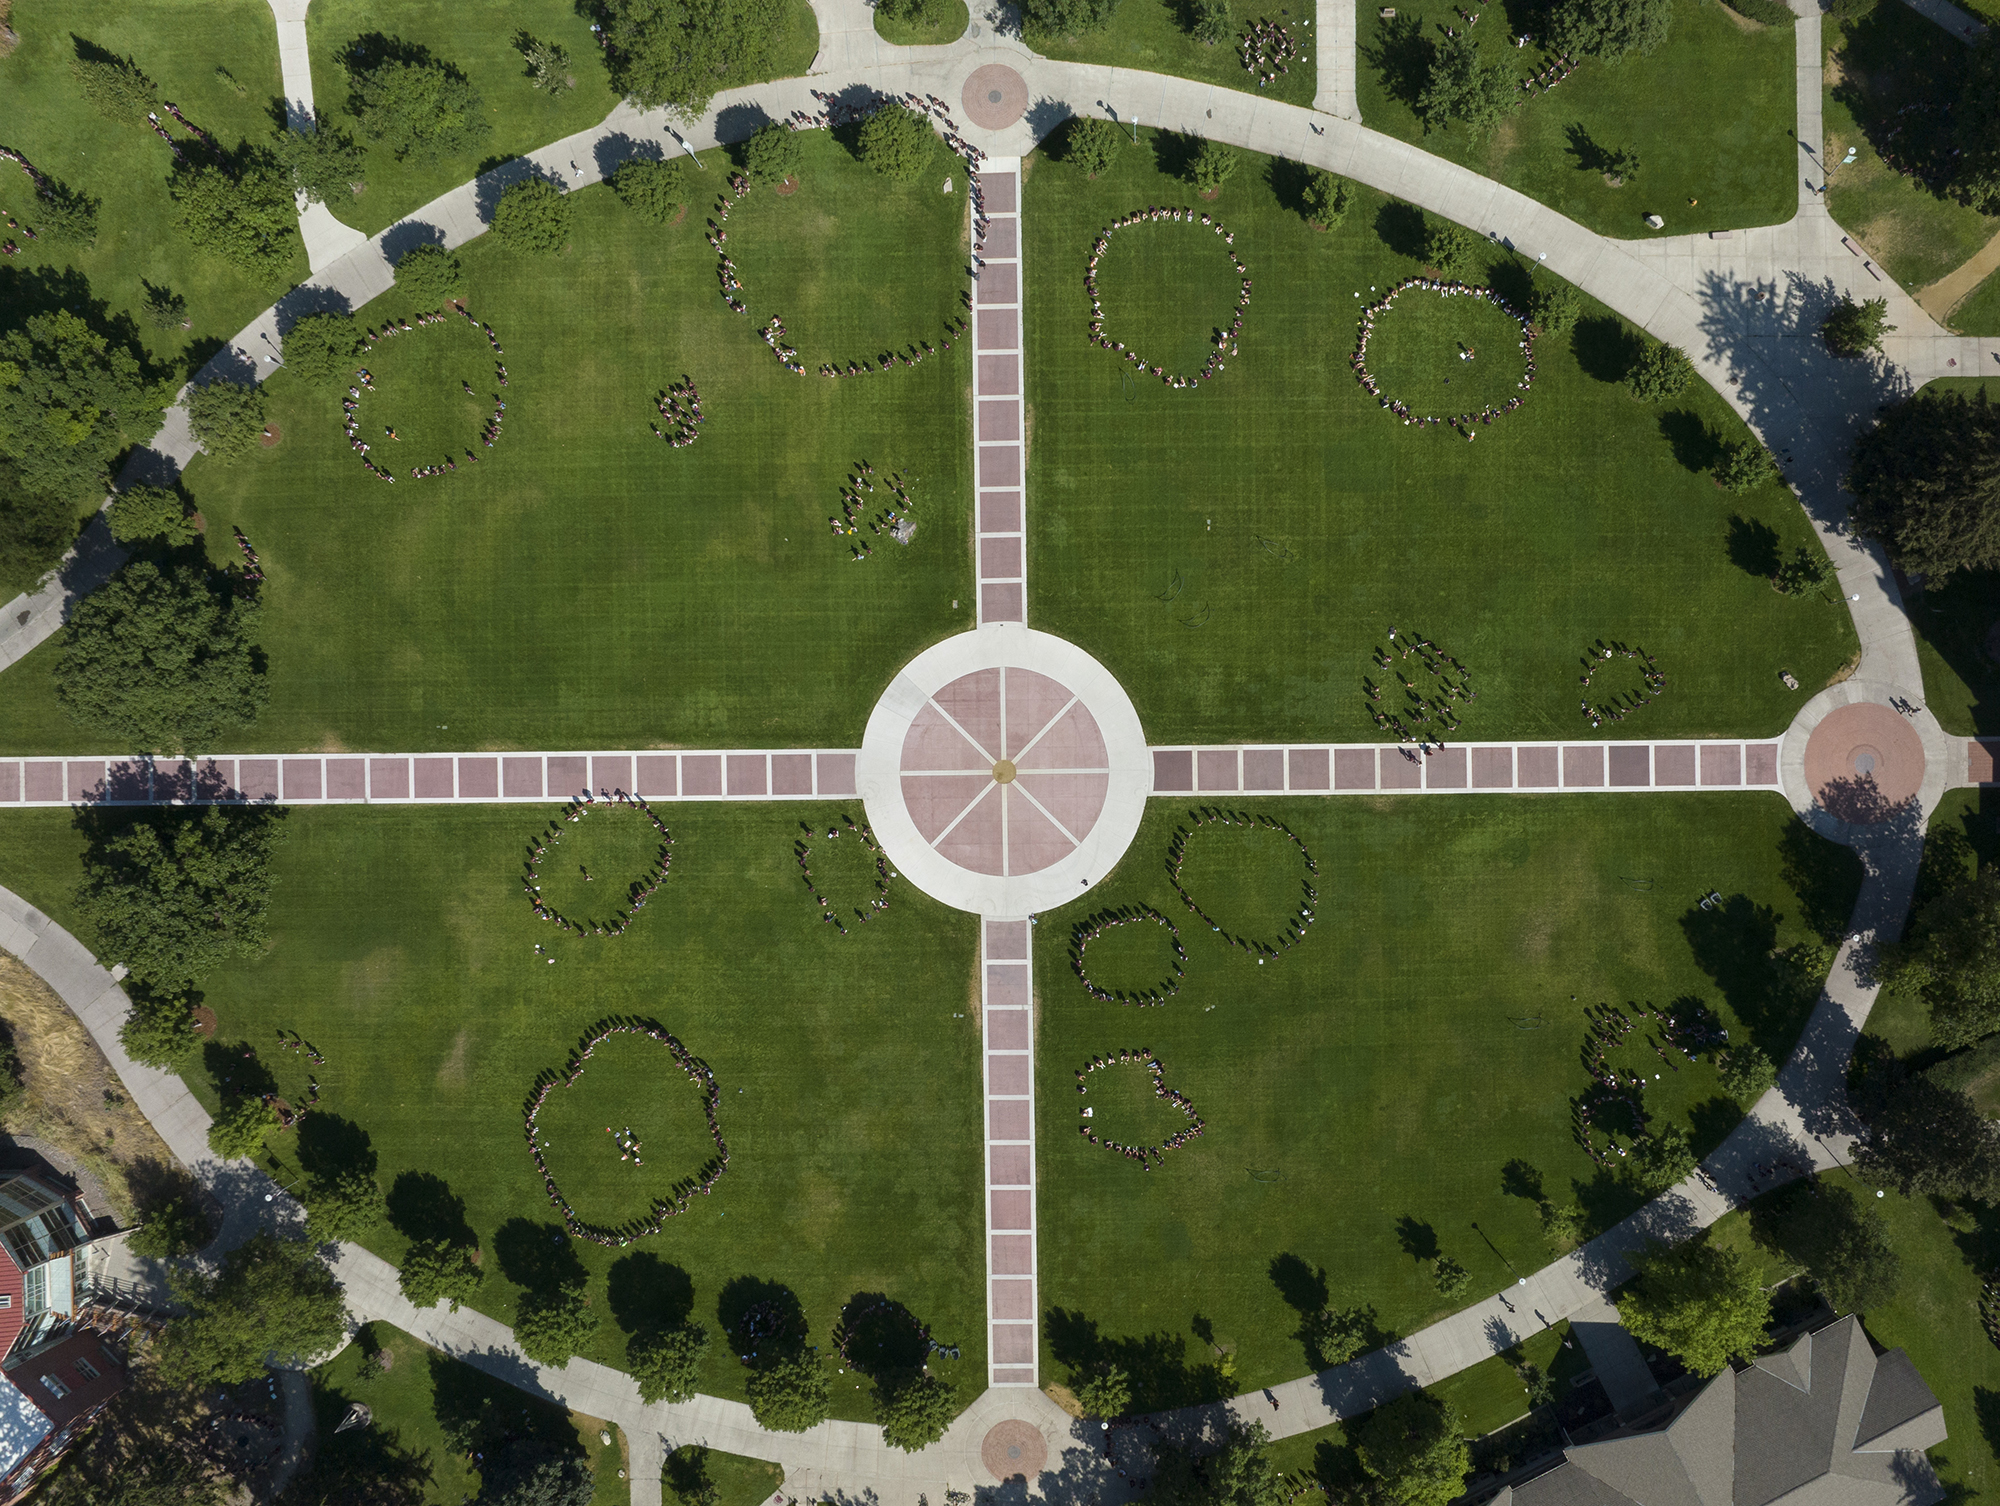 Groups of students standing in circles on the Oval, as seen from a drone flying above